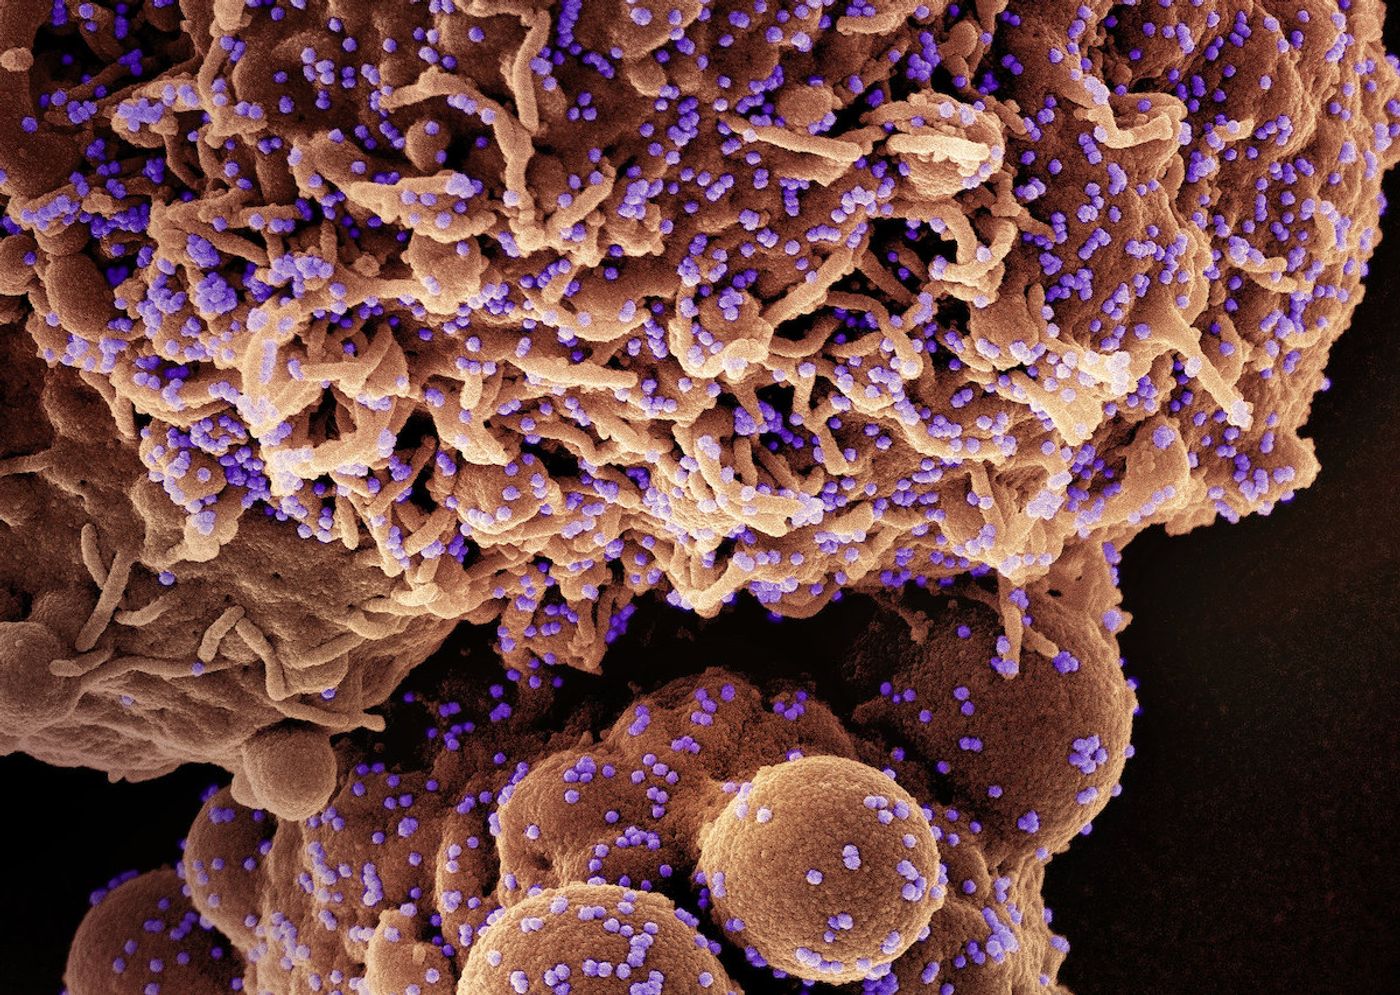 Colorized scanning electron micrograph of a cell (brown) infected with the Omicron strain of SARS-CoV-2 virus particles (purple), isolated from a patient sample. Image captured at the NIAID Integrated Research Facility (IRF) in Fort Detrick, Maryland. Credit: NIAID